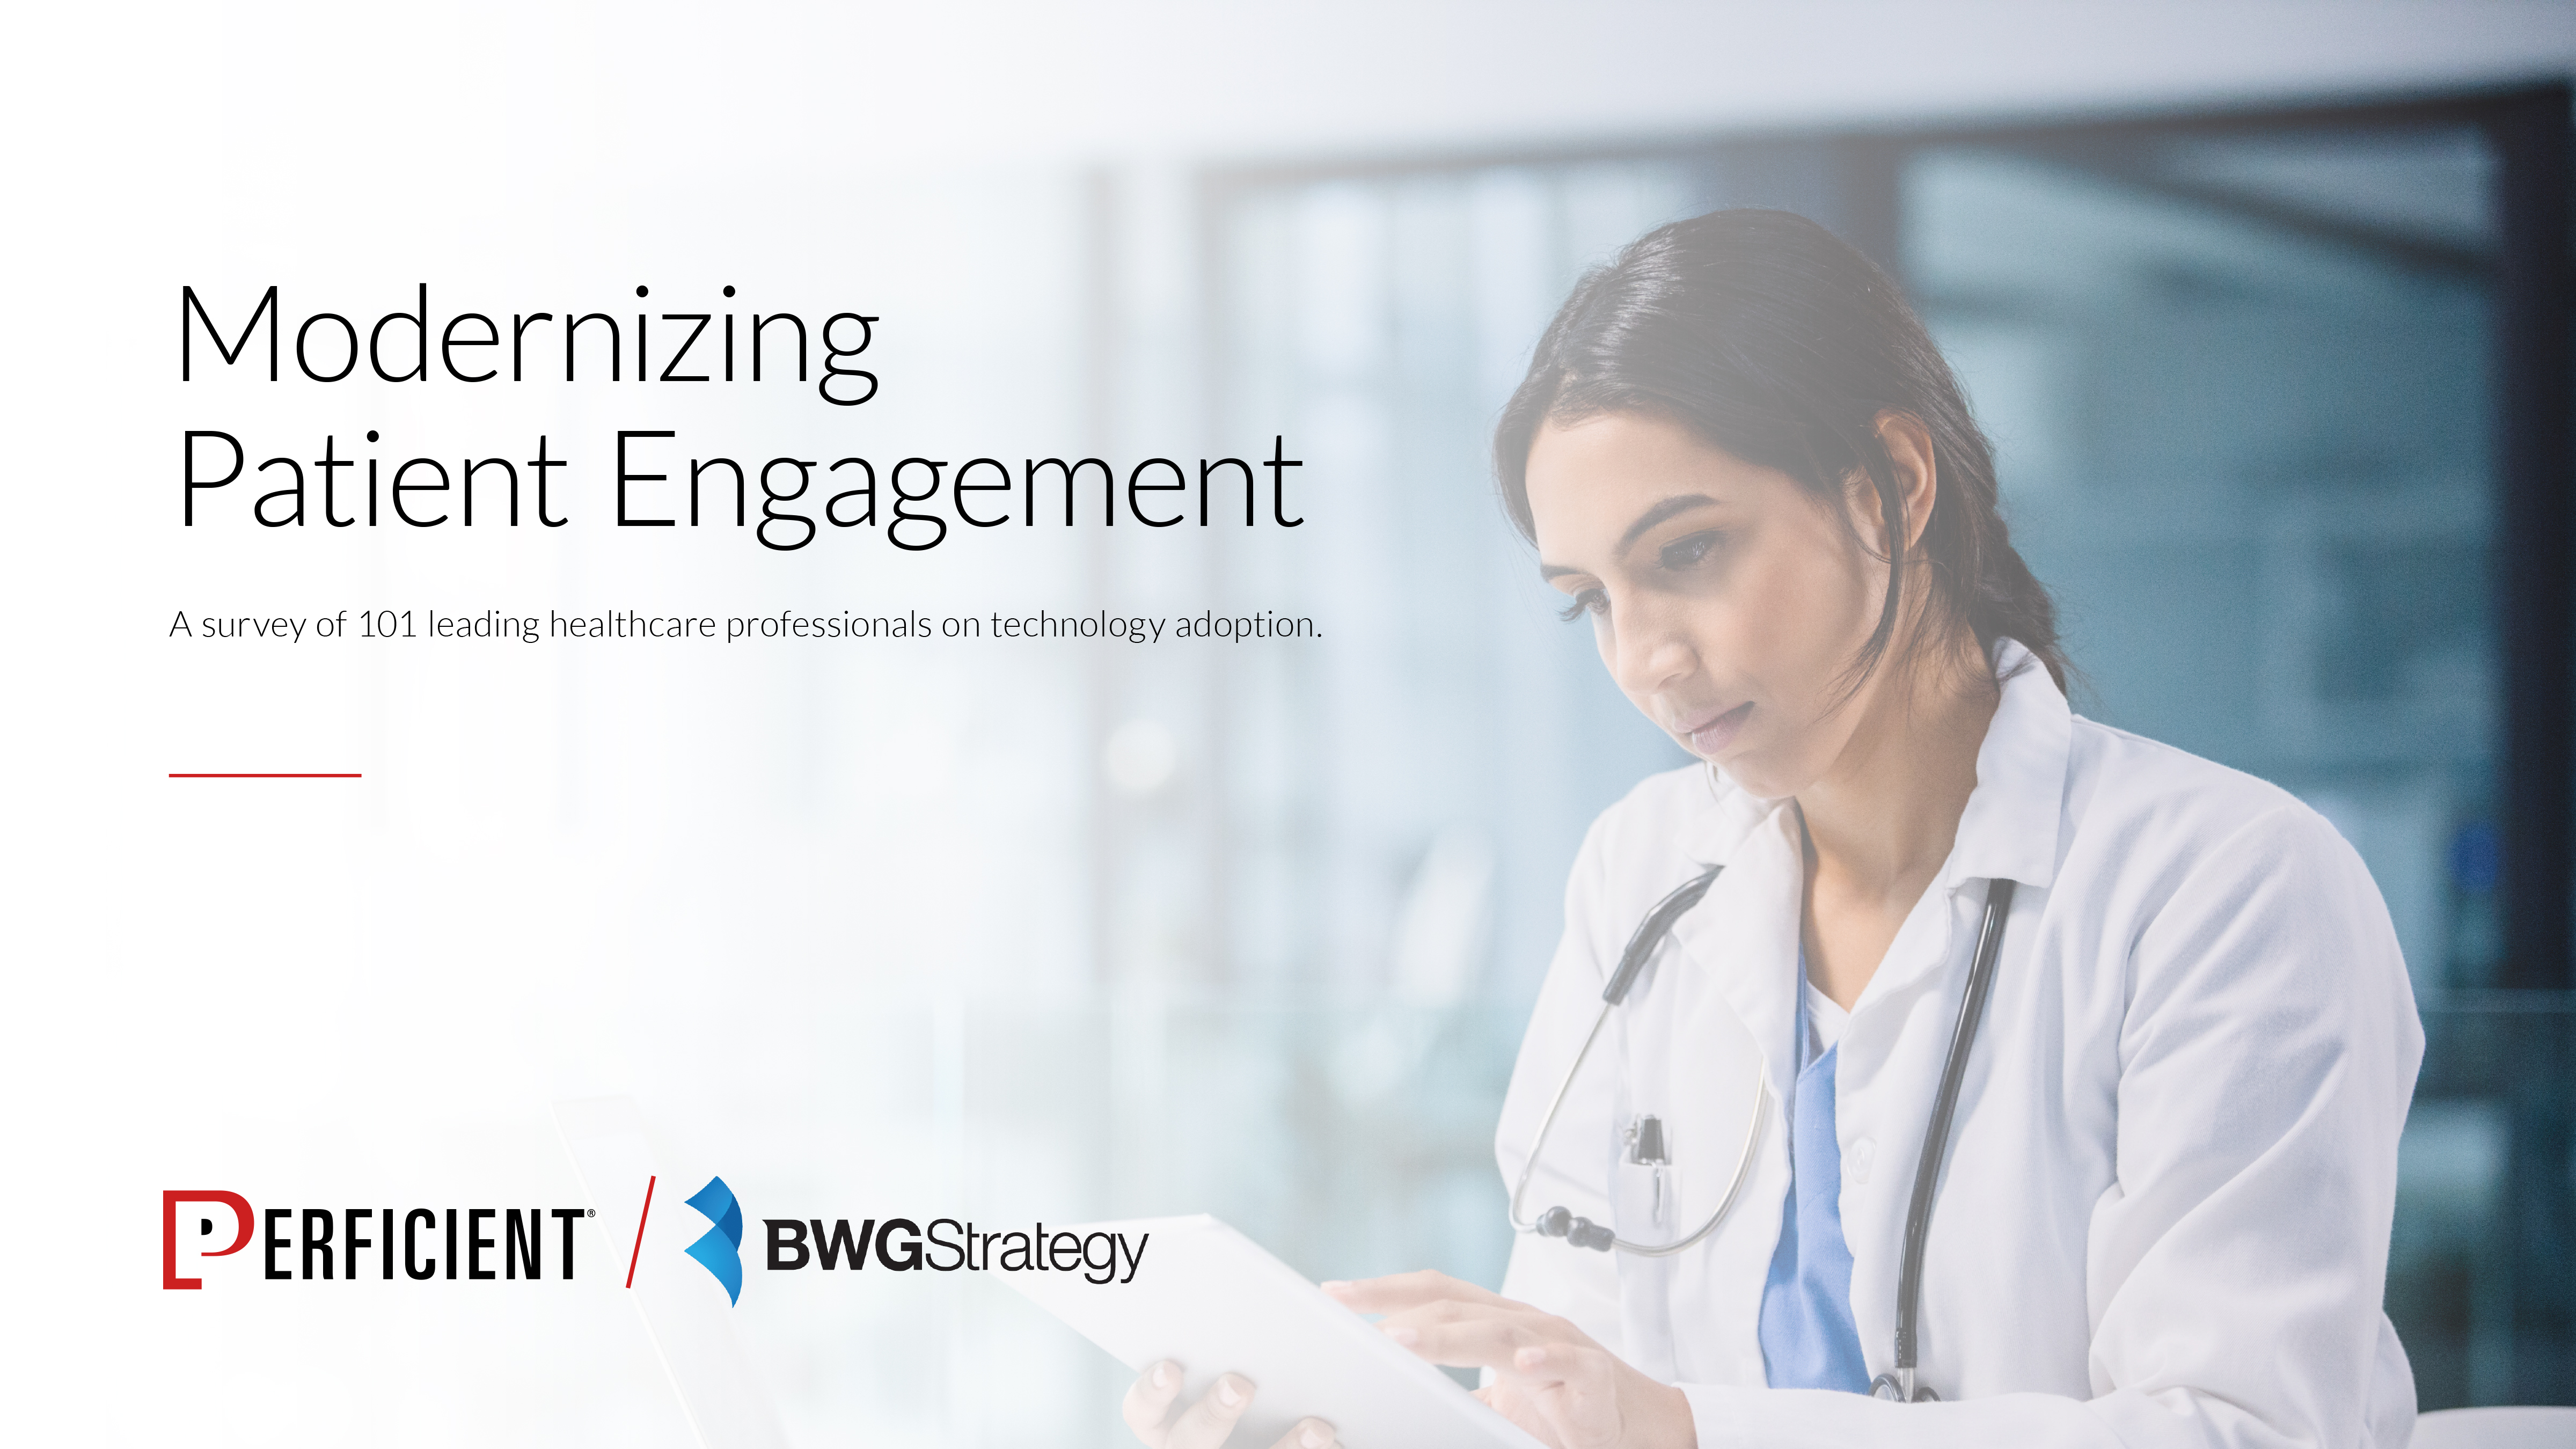 How to Modernize Patient Engagement - Guide Cover woman working in Healthcare